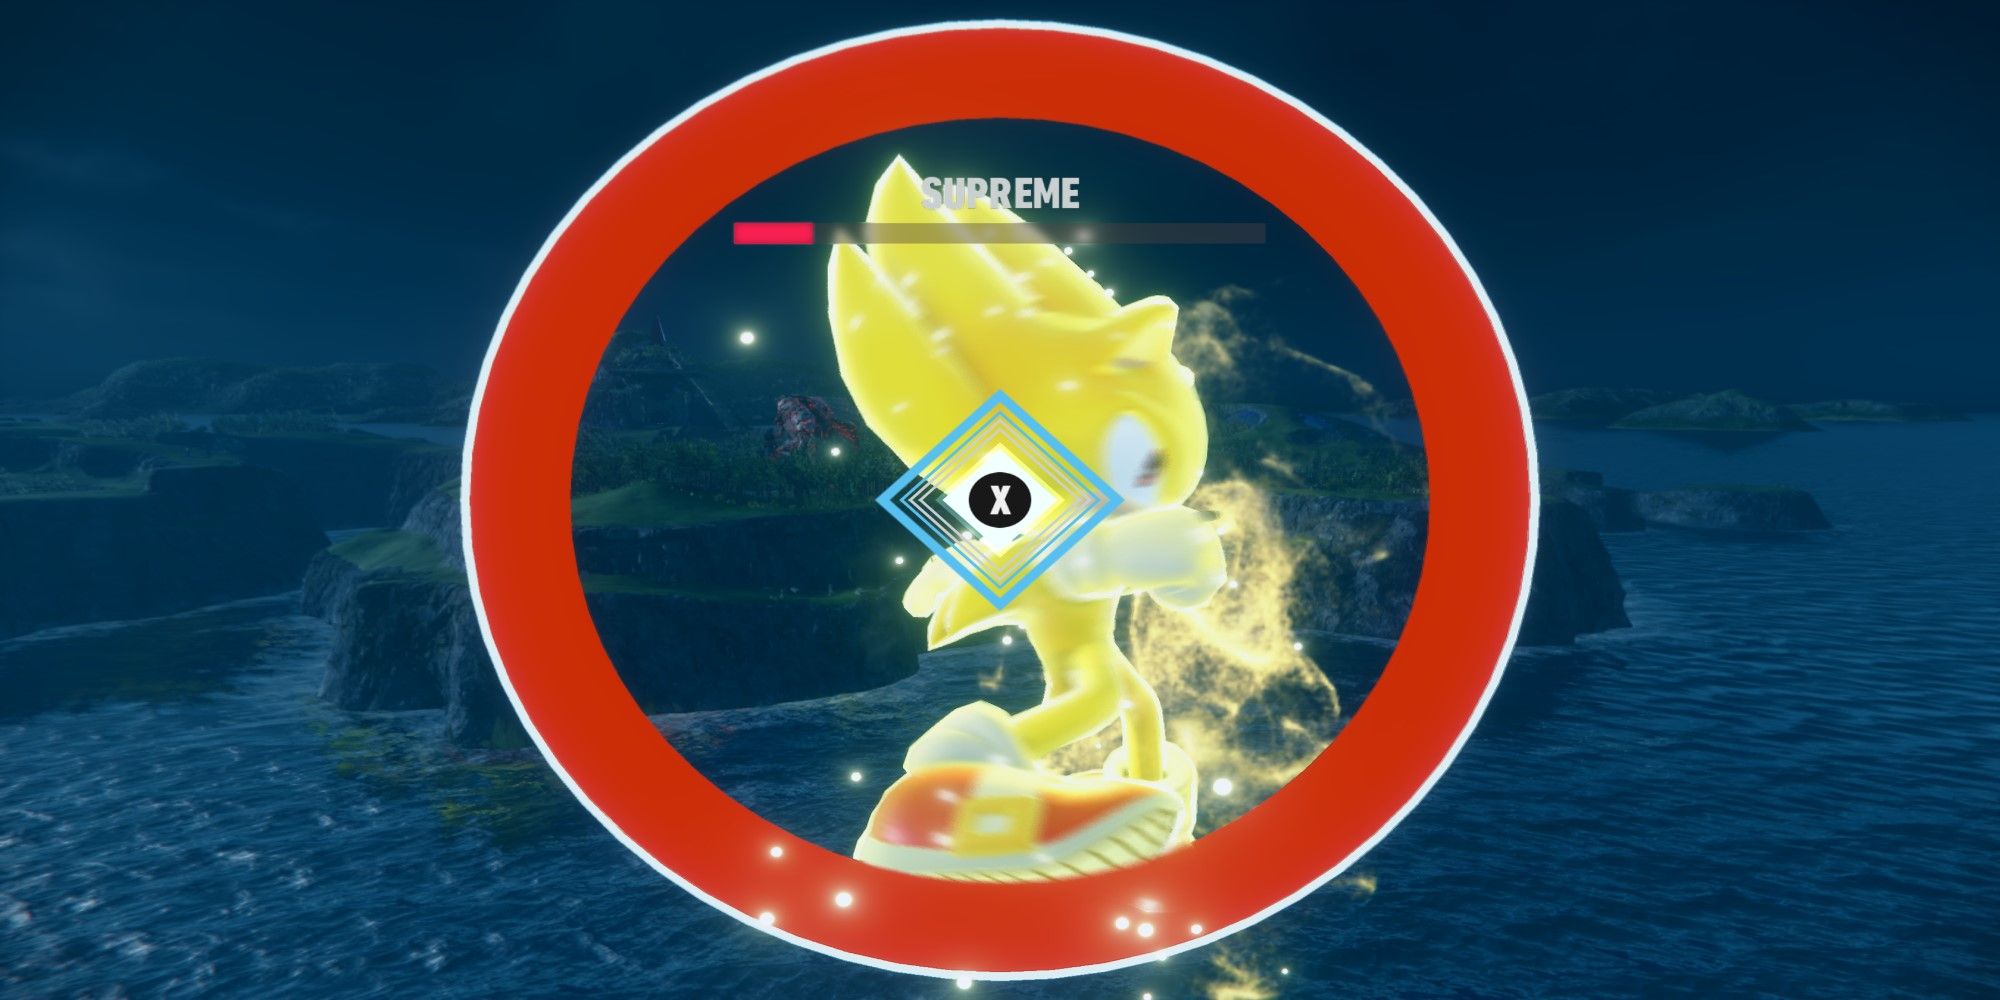 Sonic Frontier's Supreme Titan Boss Fight matches the white and red ring as Super Sonic